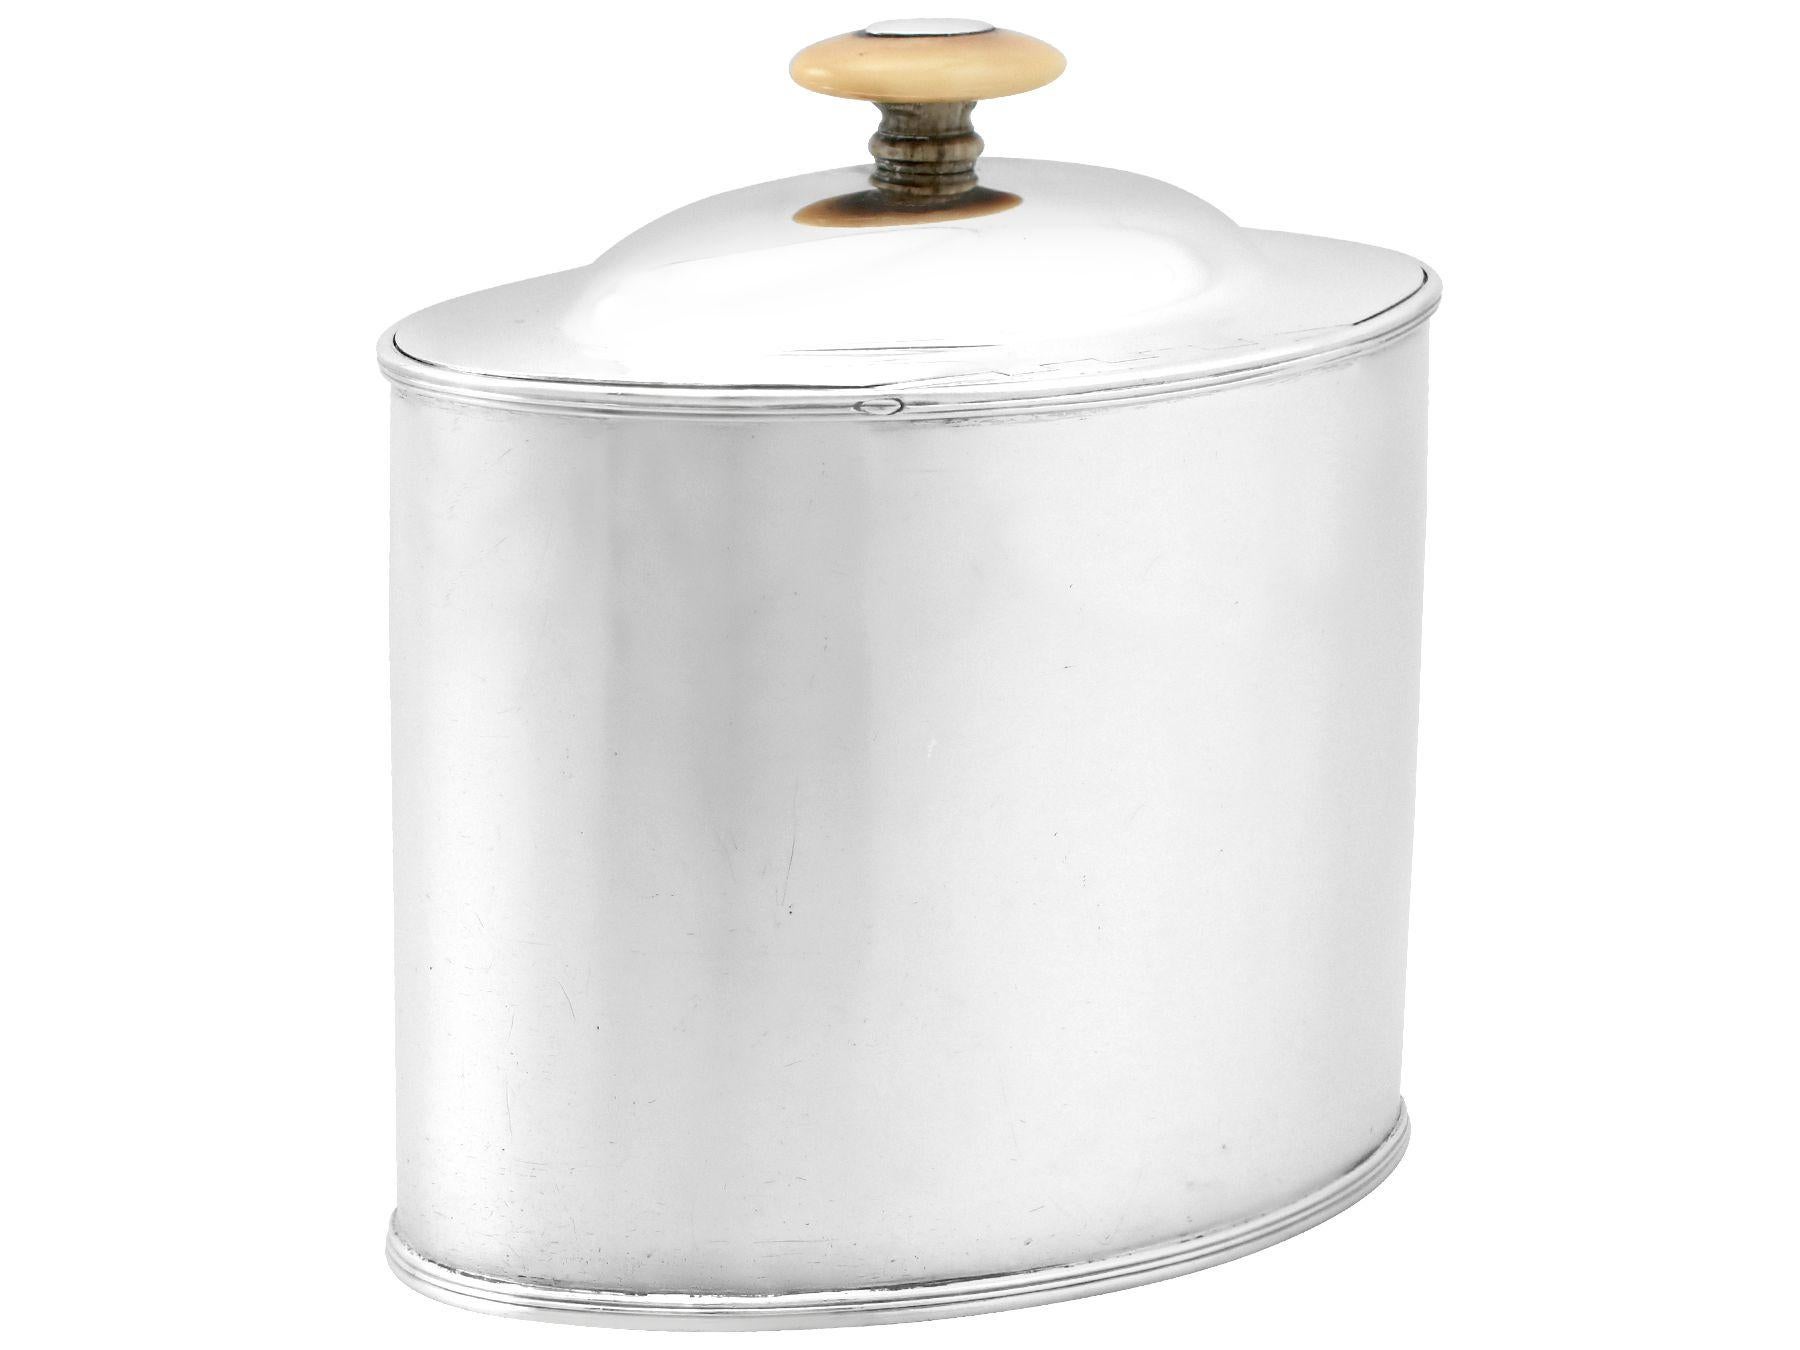 Late 18th Century Antique George III Sterling Silver Locking Tea Caddy For Sale